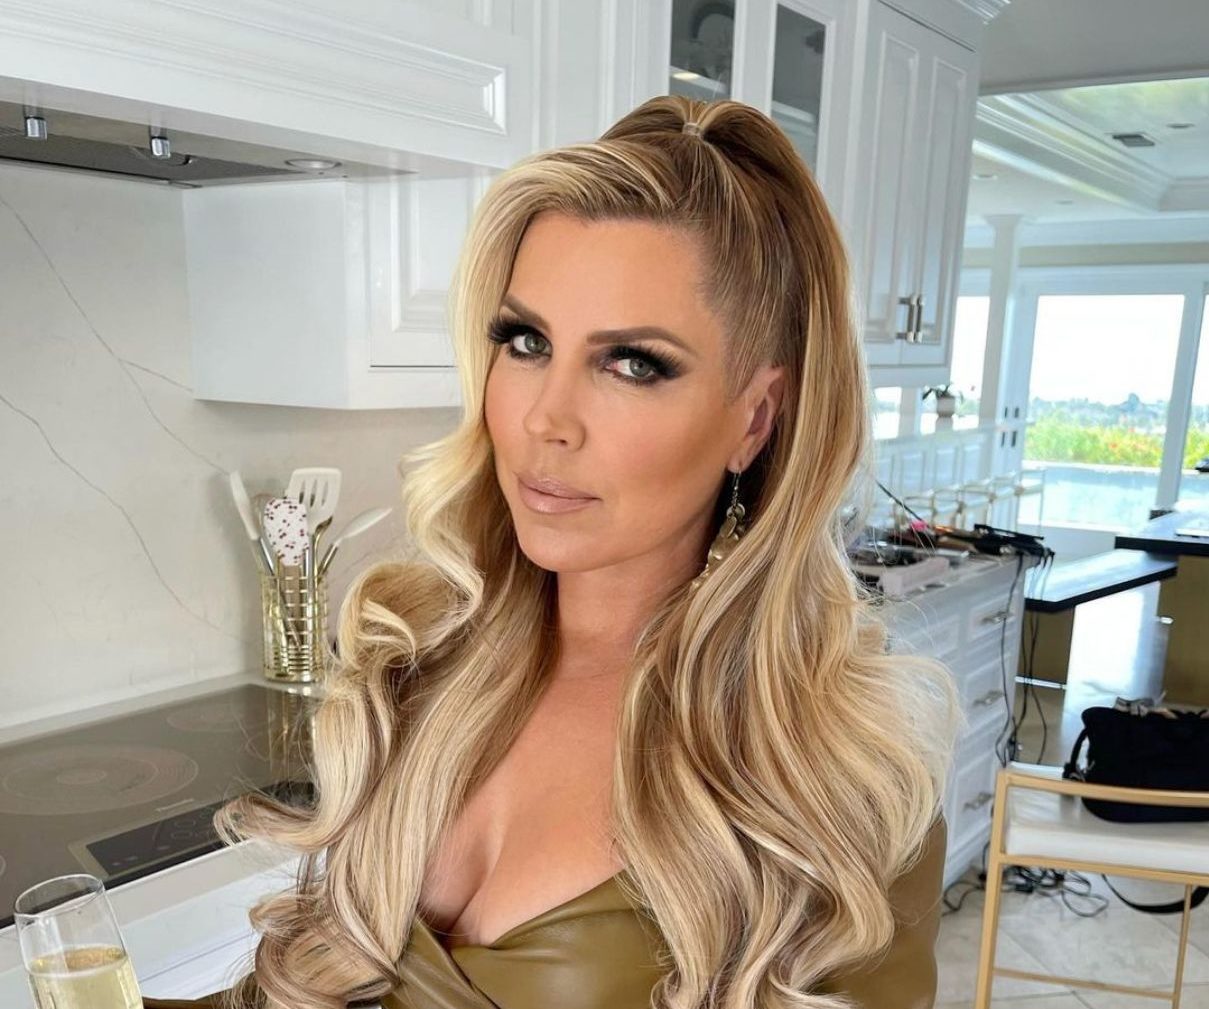 RHOC's Dr. Jen Armstrong Addresses Claims of Medical Malpractice, Explains Her Certification, and Ryne's "Rude" Behavior, Plus Compares Noella to a "Drunk Three-Year-Old"